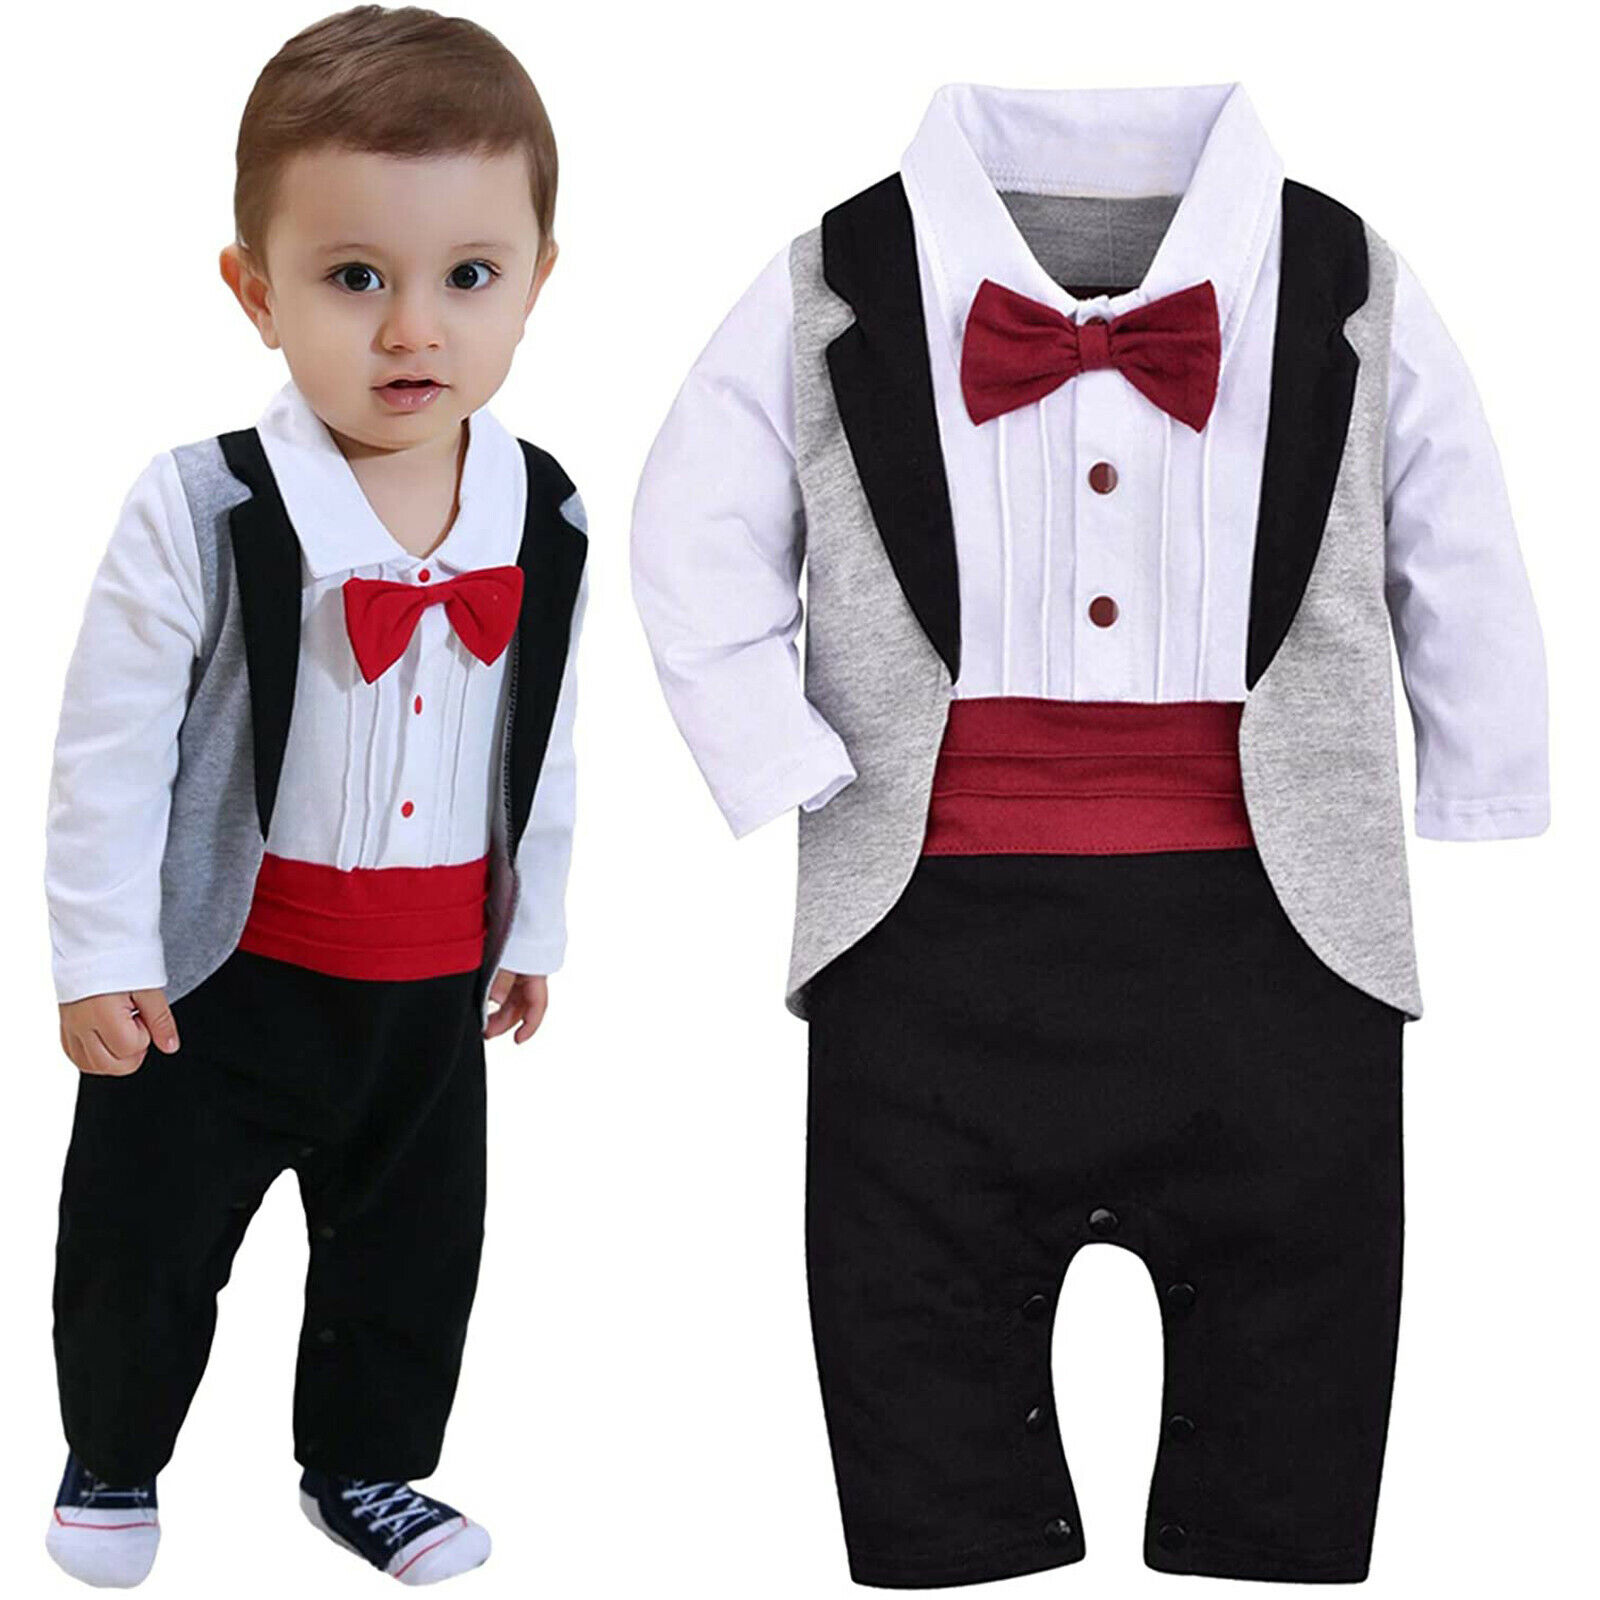 Lovely Newborn Infant Baby Boys Gentleman Romper Jumpsuit Wedding Party Outfits